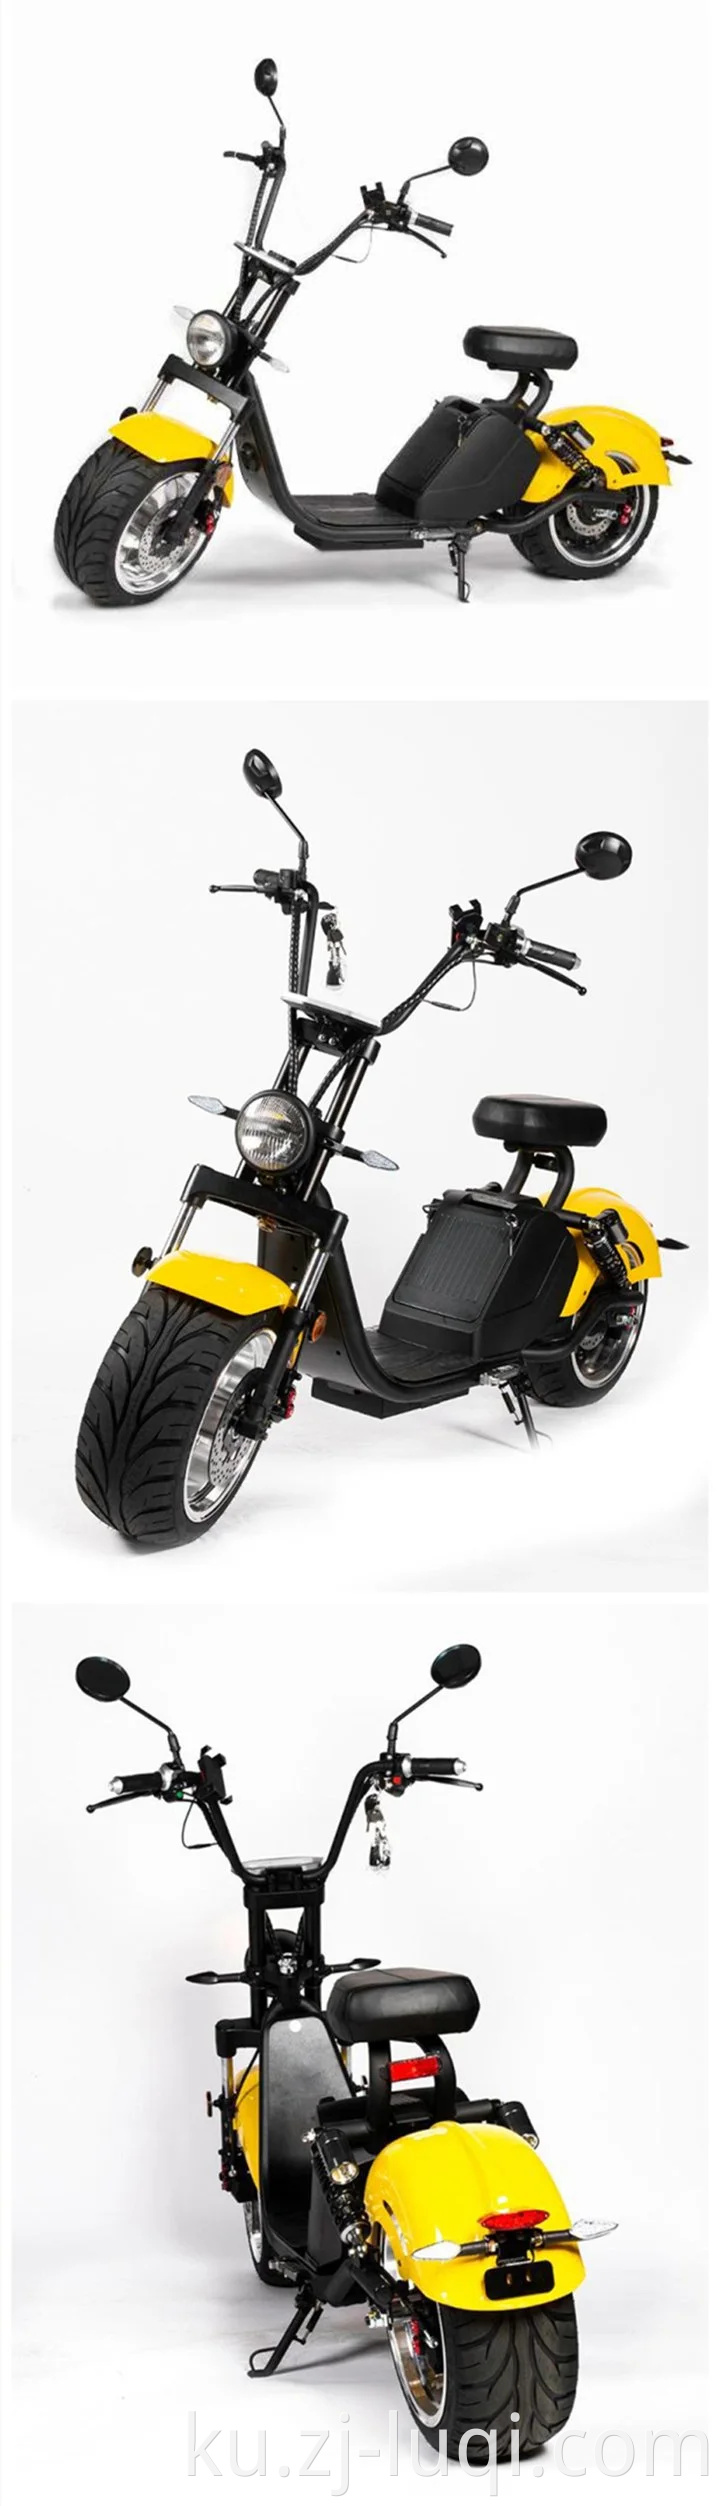 Wholesale Best Buy 2020 New Motorcycle Eec Fat Tire 1500W / 3000W CityCOCO Adult Chopper Scooter